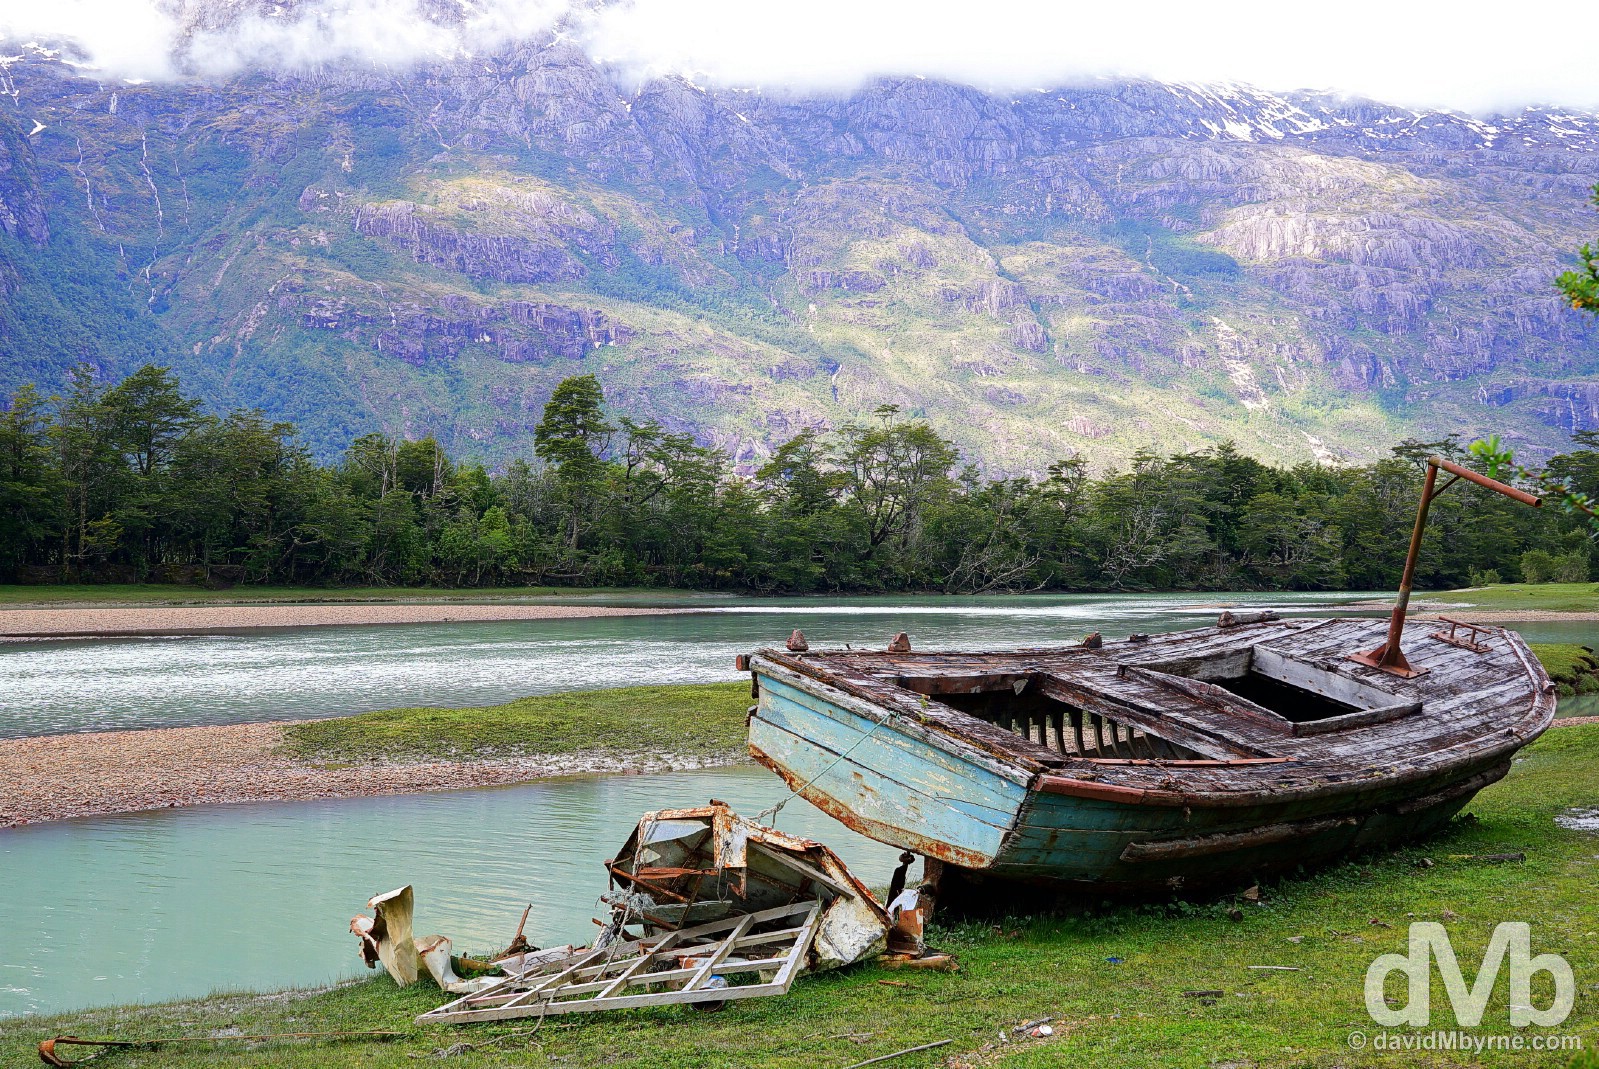 A disused boat laying by the Baker River outside Caleta Tortel in Aysen, Chile. October 28, 2015.